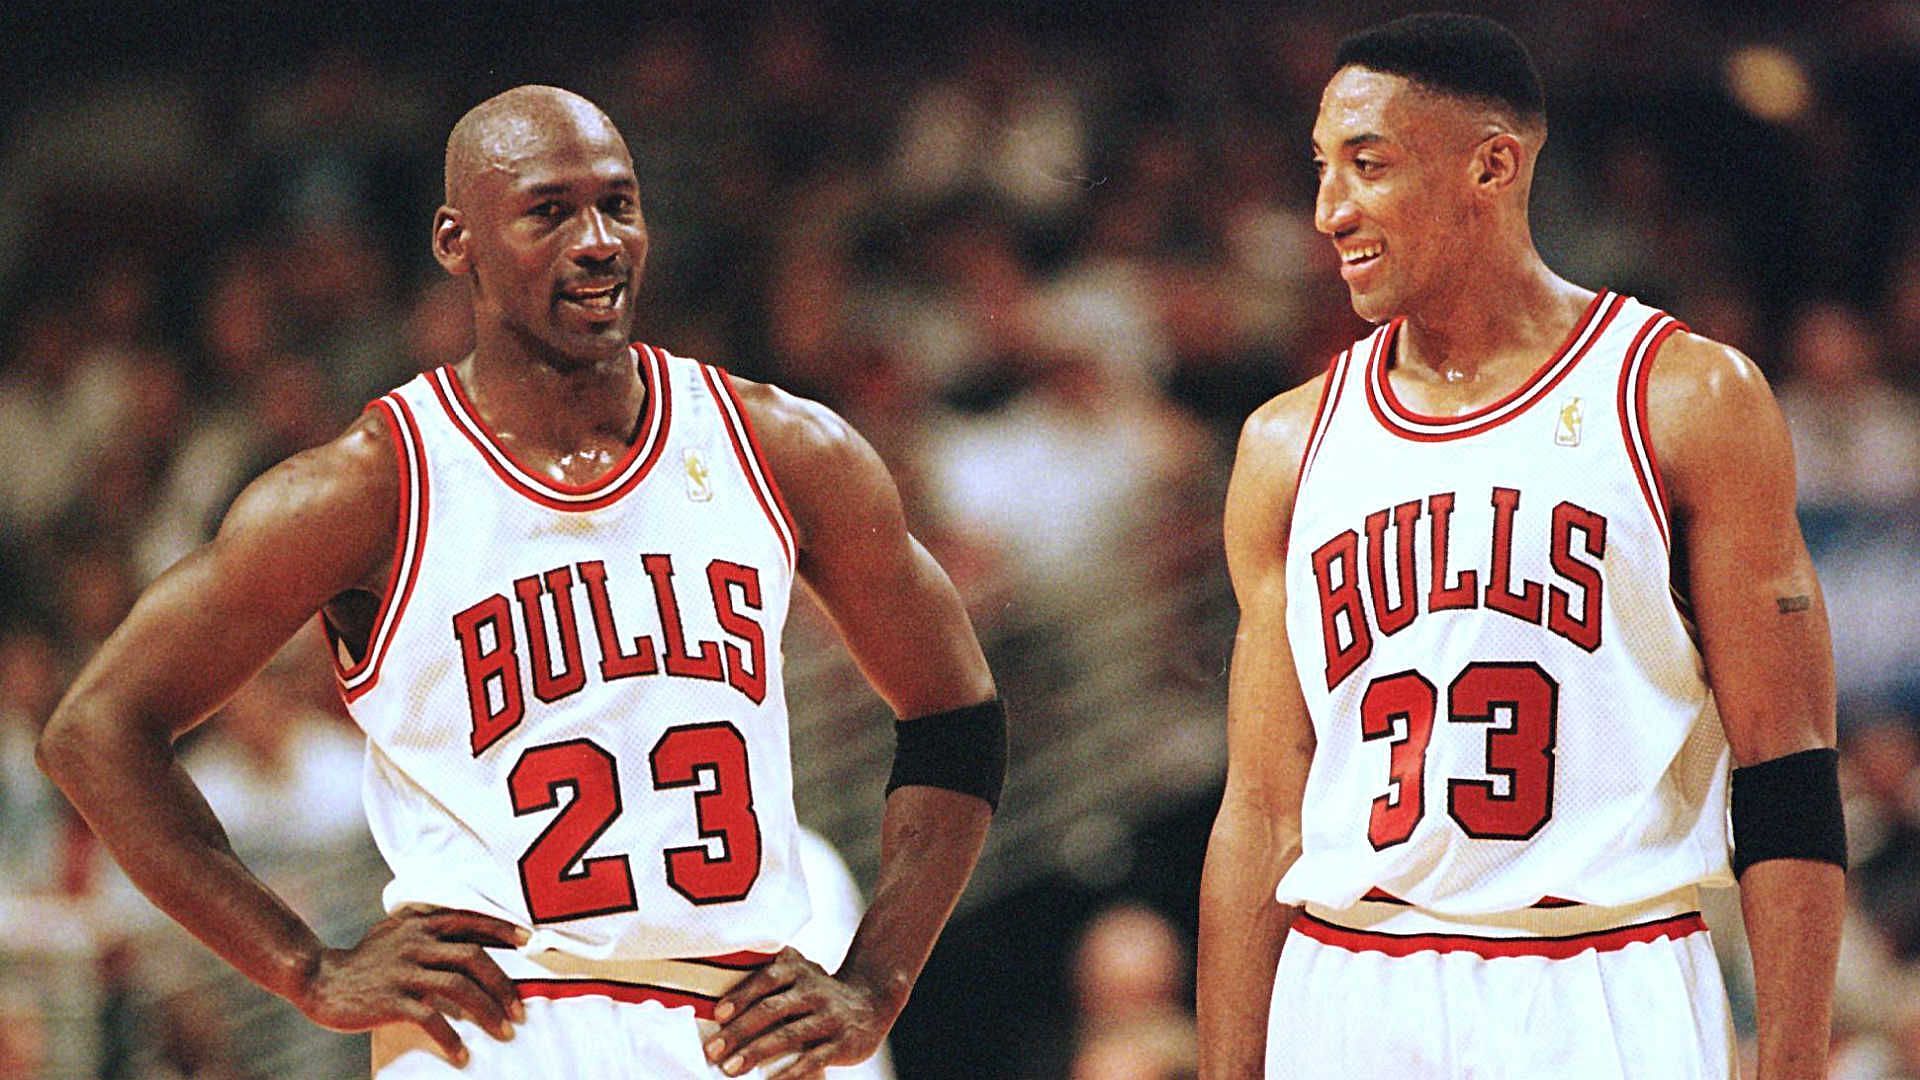 Everybody calling this guy the GOAT, and you ain't Top 25 in scoring” - Charles  Oakley on Scottie Pippen claiming he's better than Michael Jordan